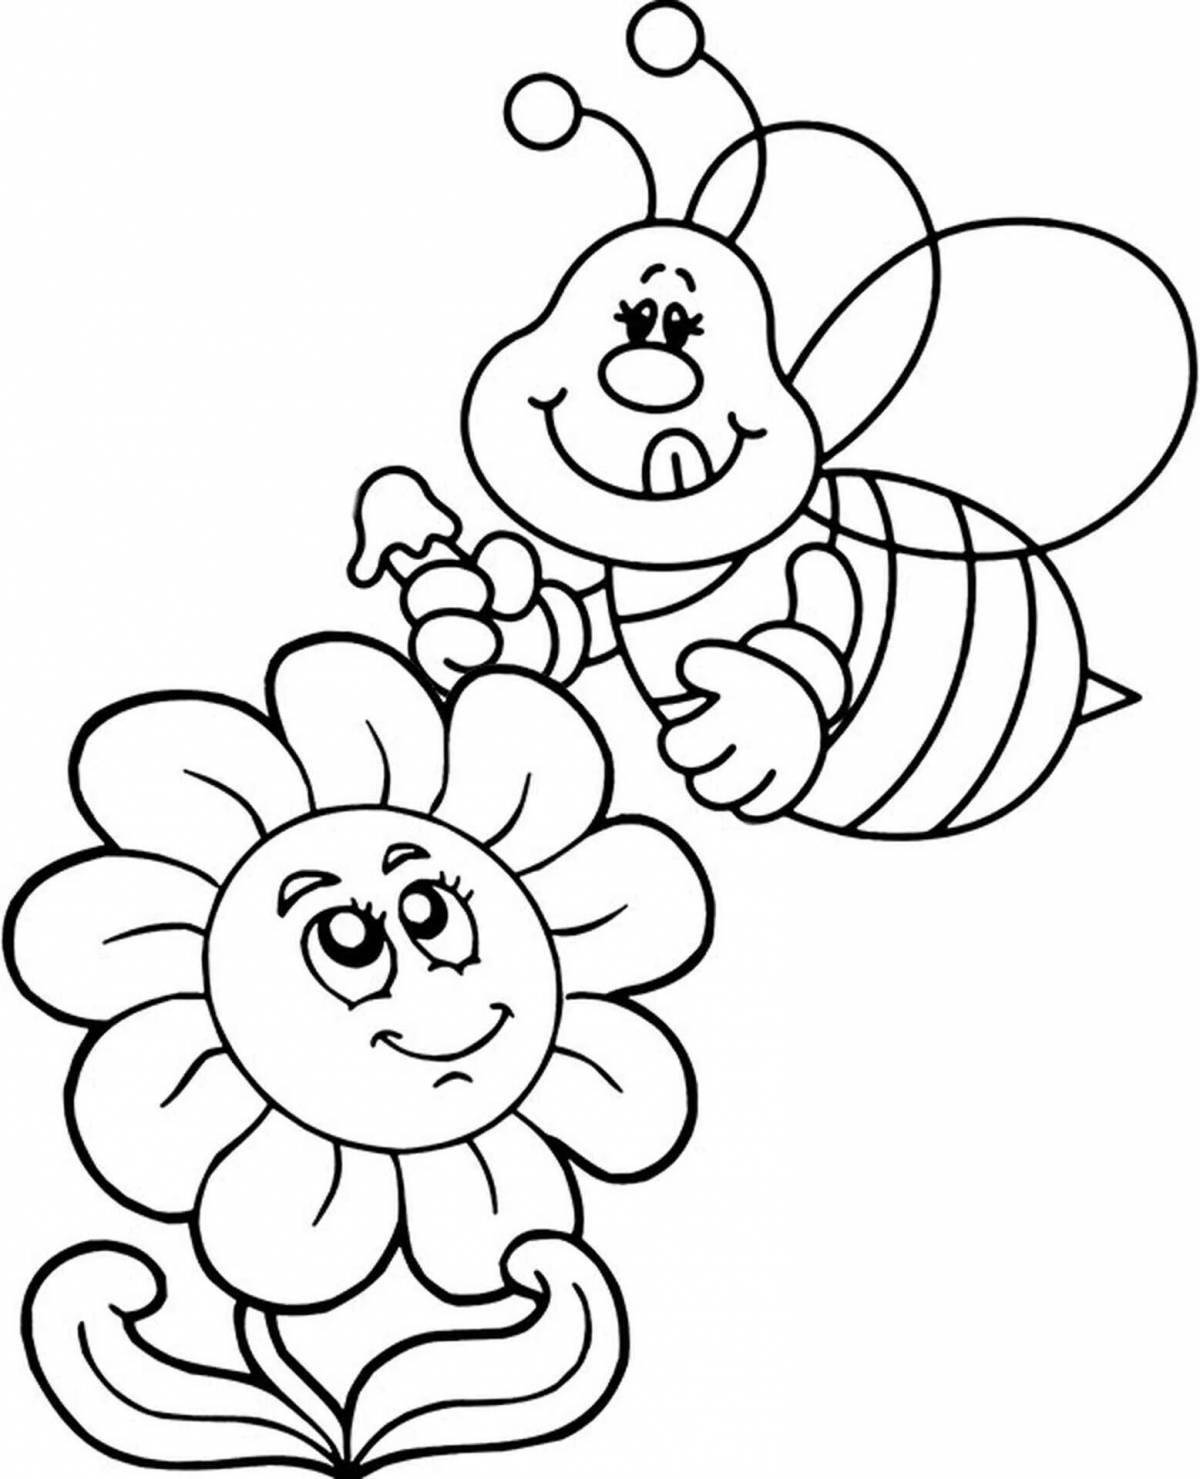 Colorful bee coloring page on a flower